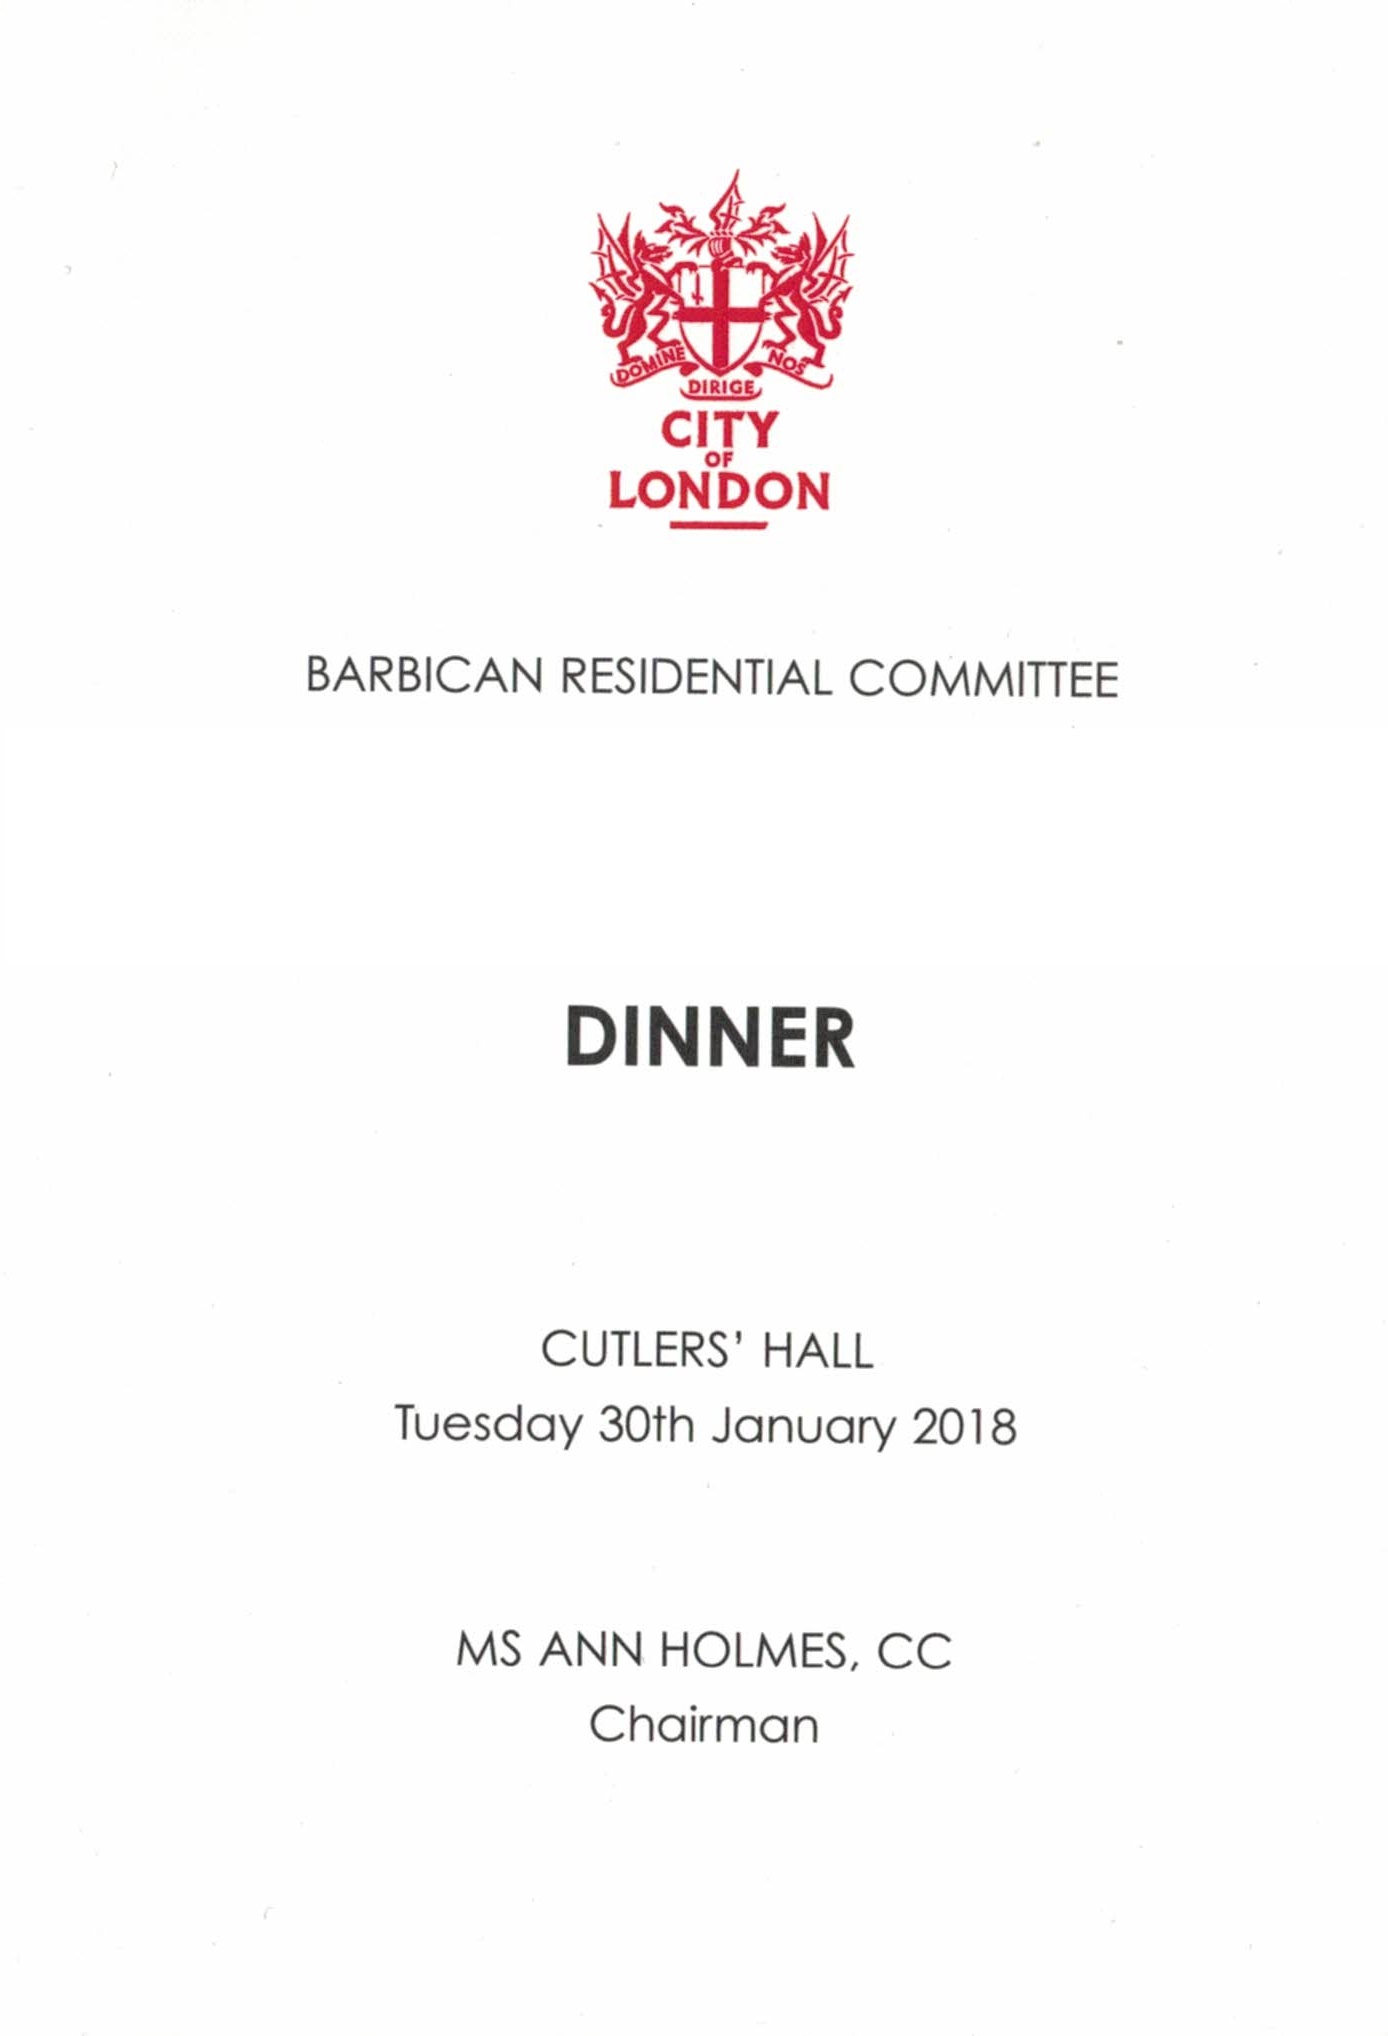 City of London Barbican Residential Committee Dinner - Cutlers' Hall Jan 2018